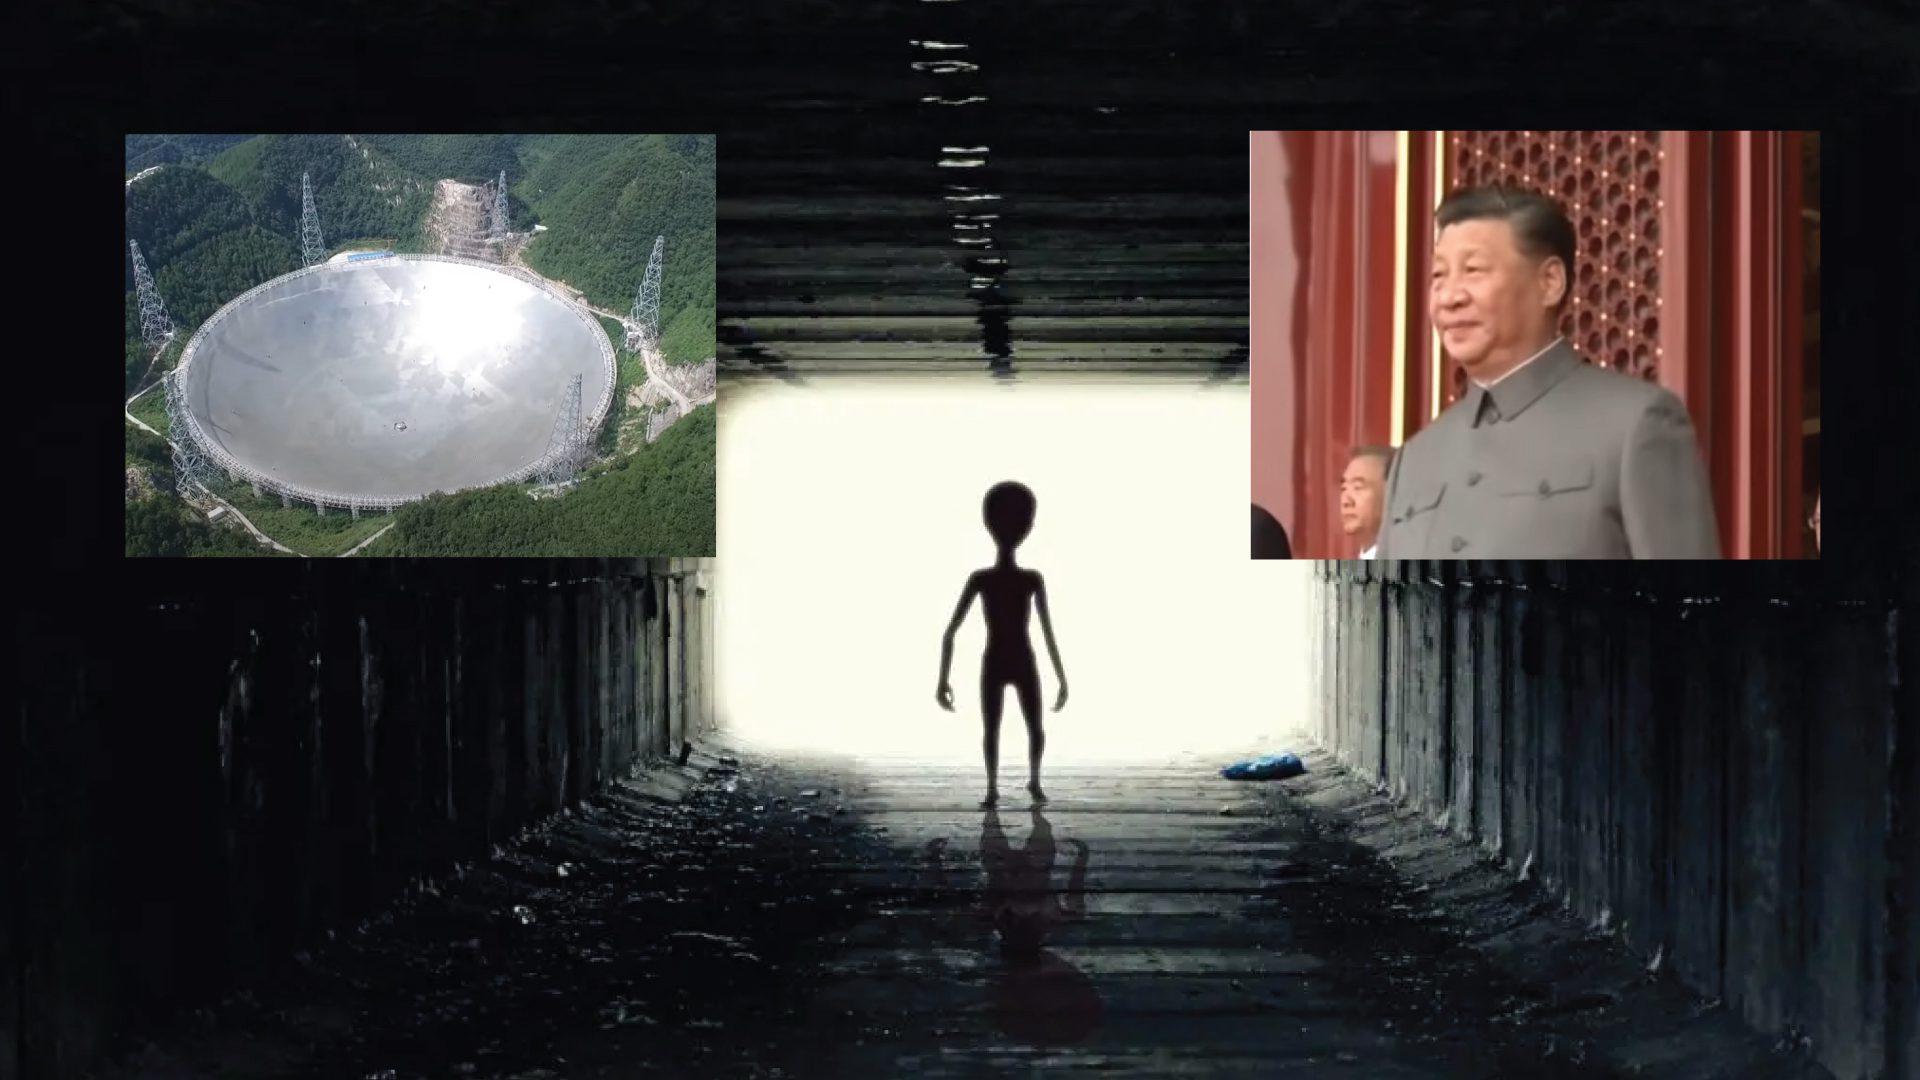 China may have made contact with aliens